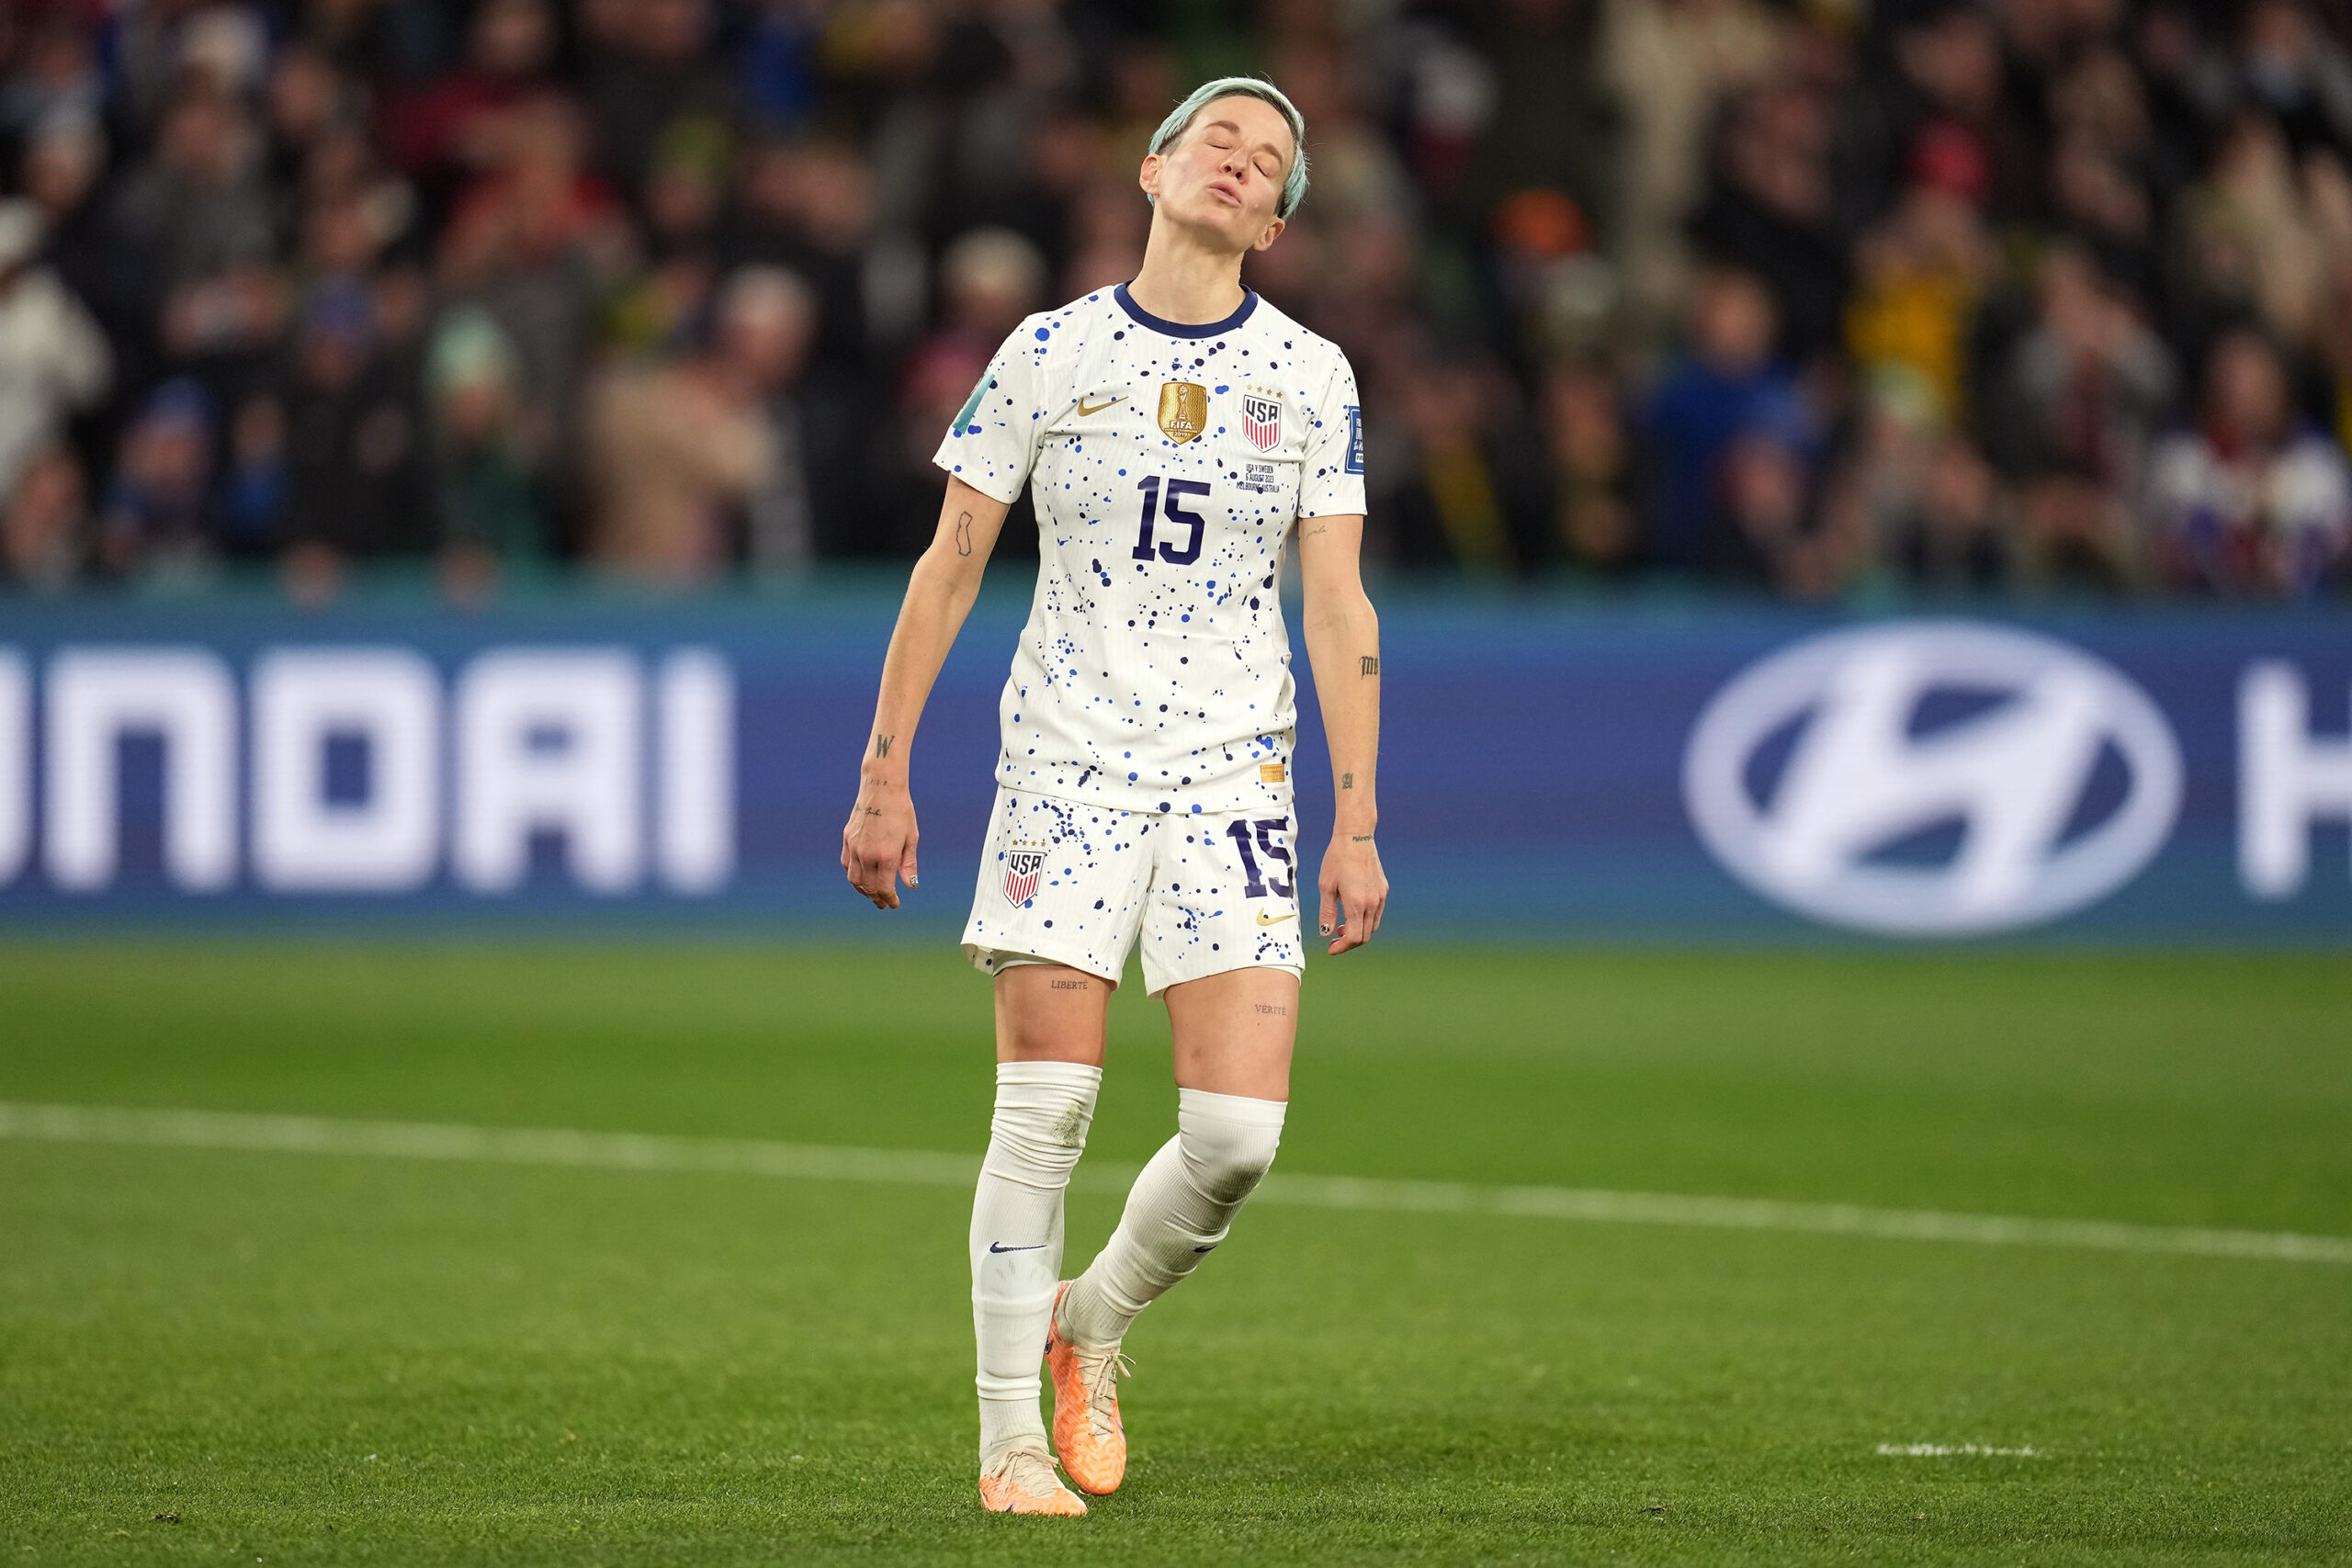 US knocked out of competition after penalty shootout loss to Sweden